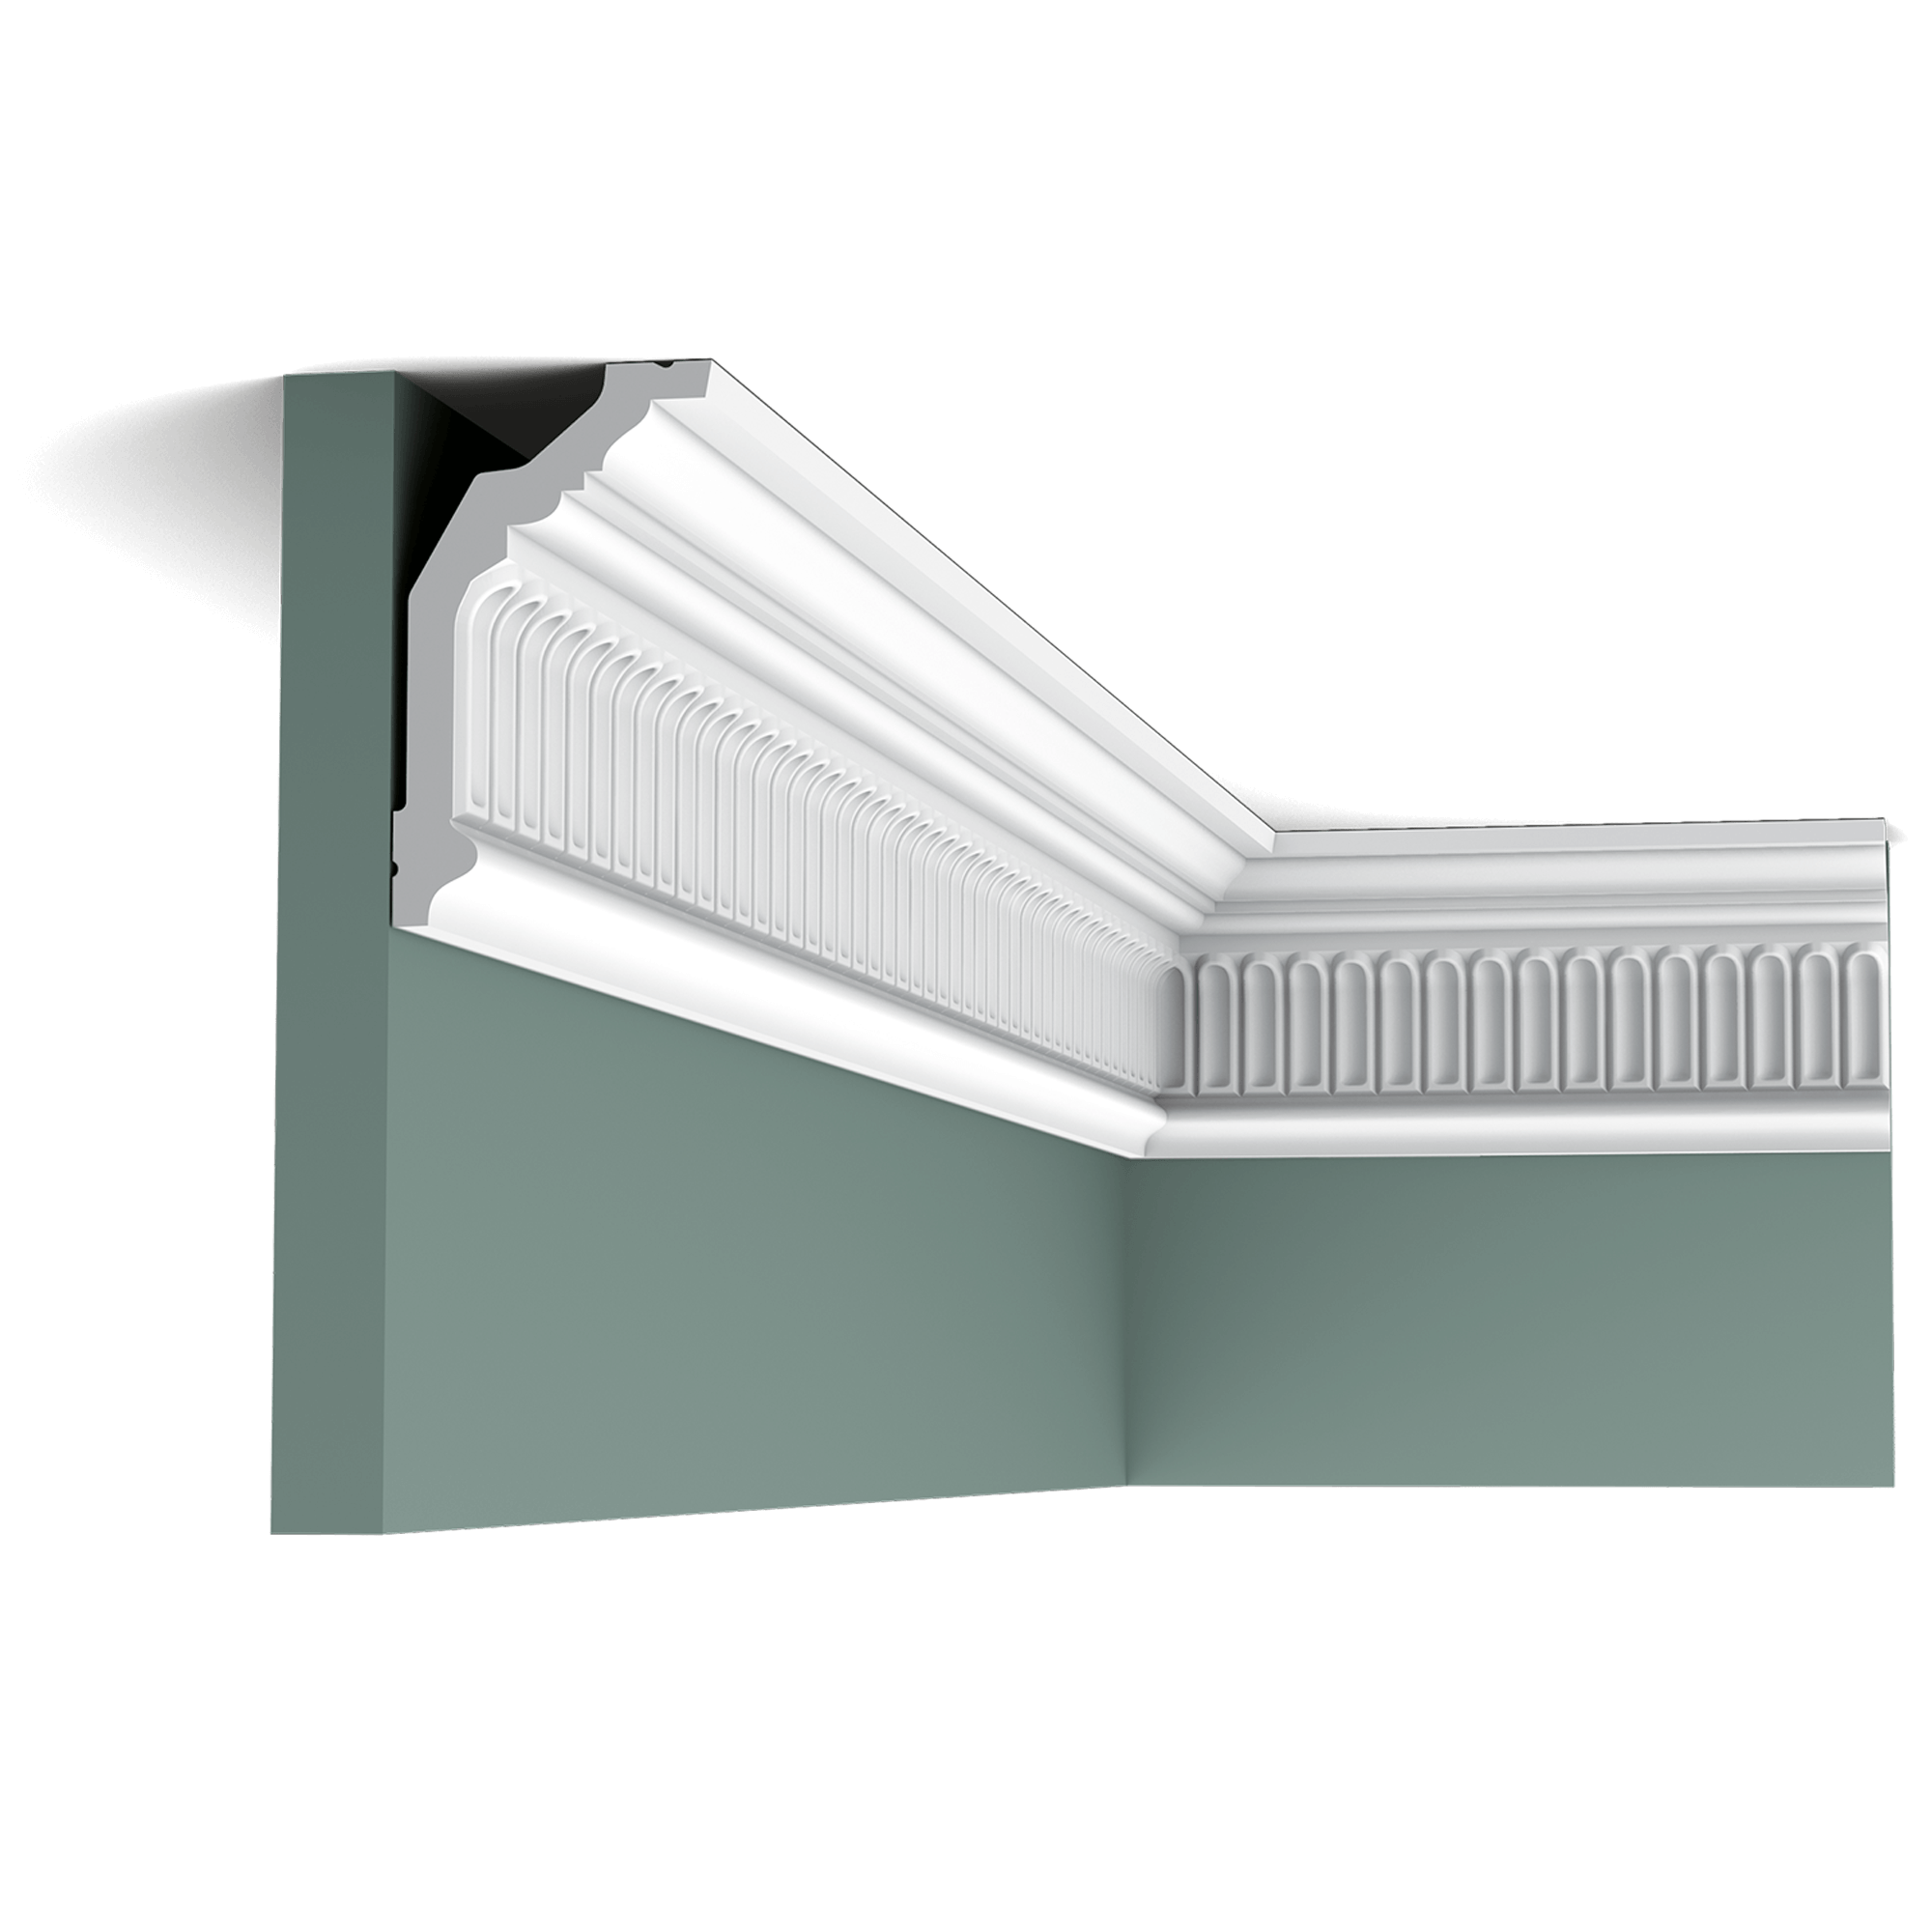 c304 border 1d09 Traditional moulding with ribbed pattern. Whether classical or modern, this moulding gives your room that little something extra.